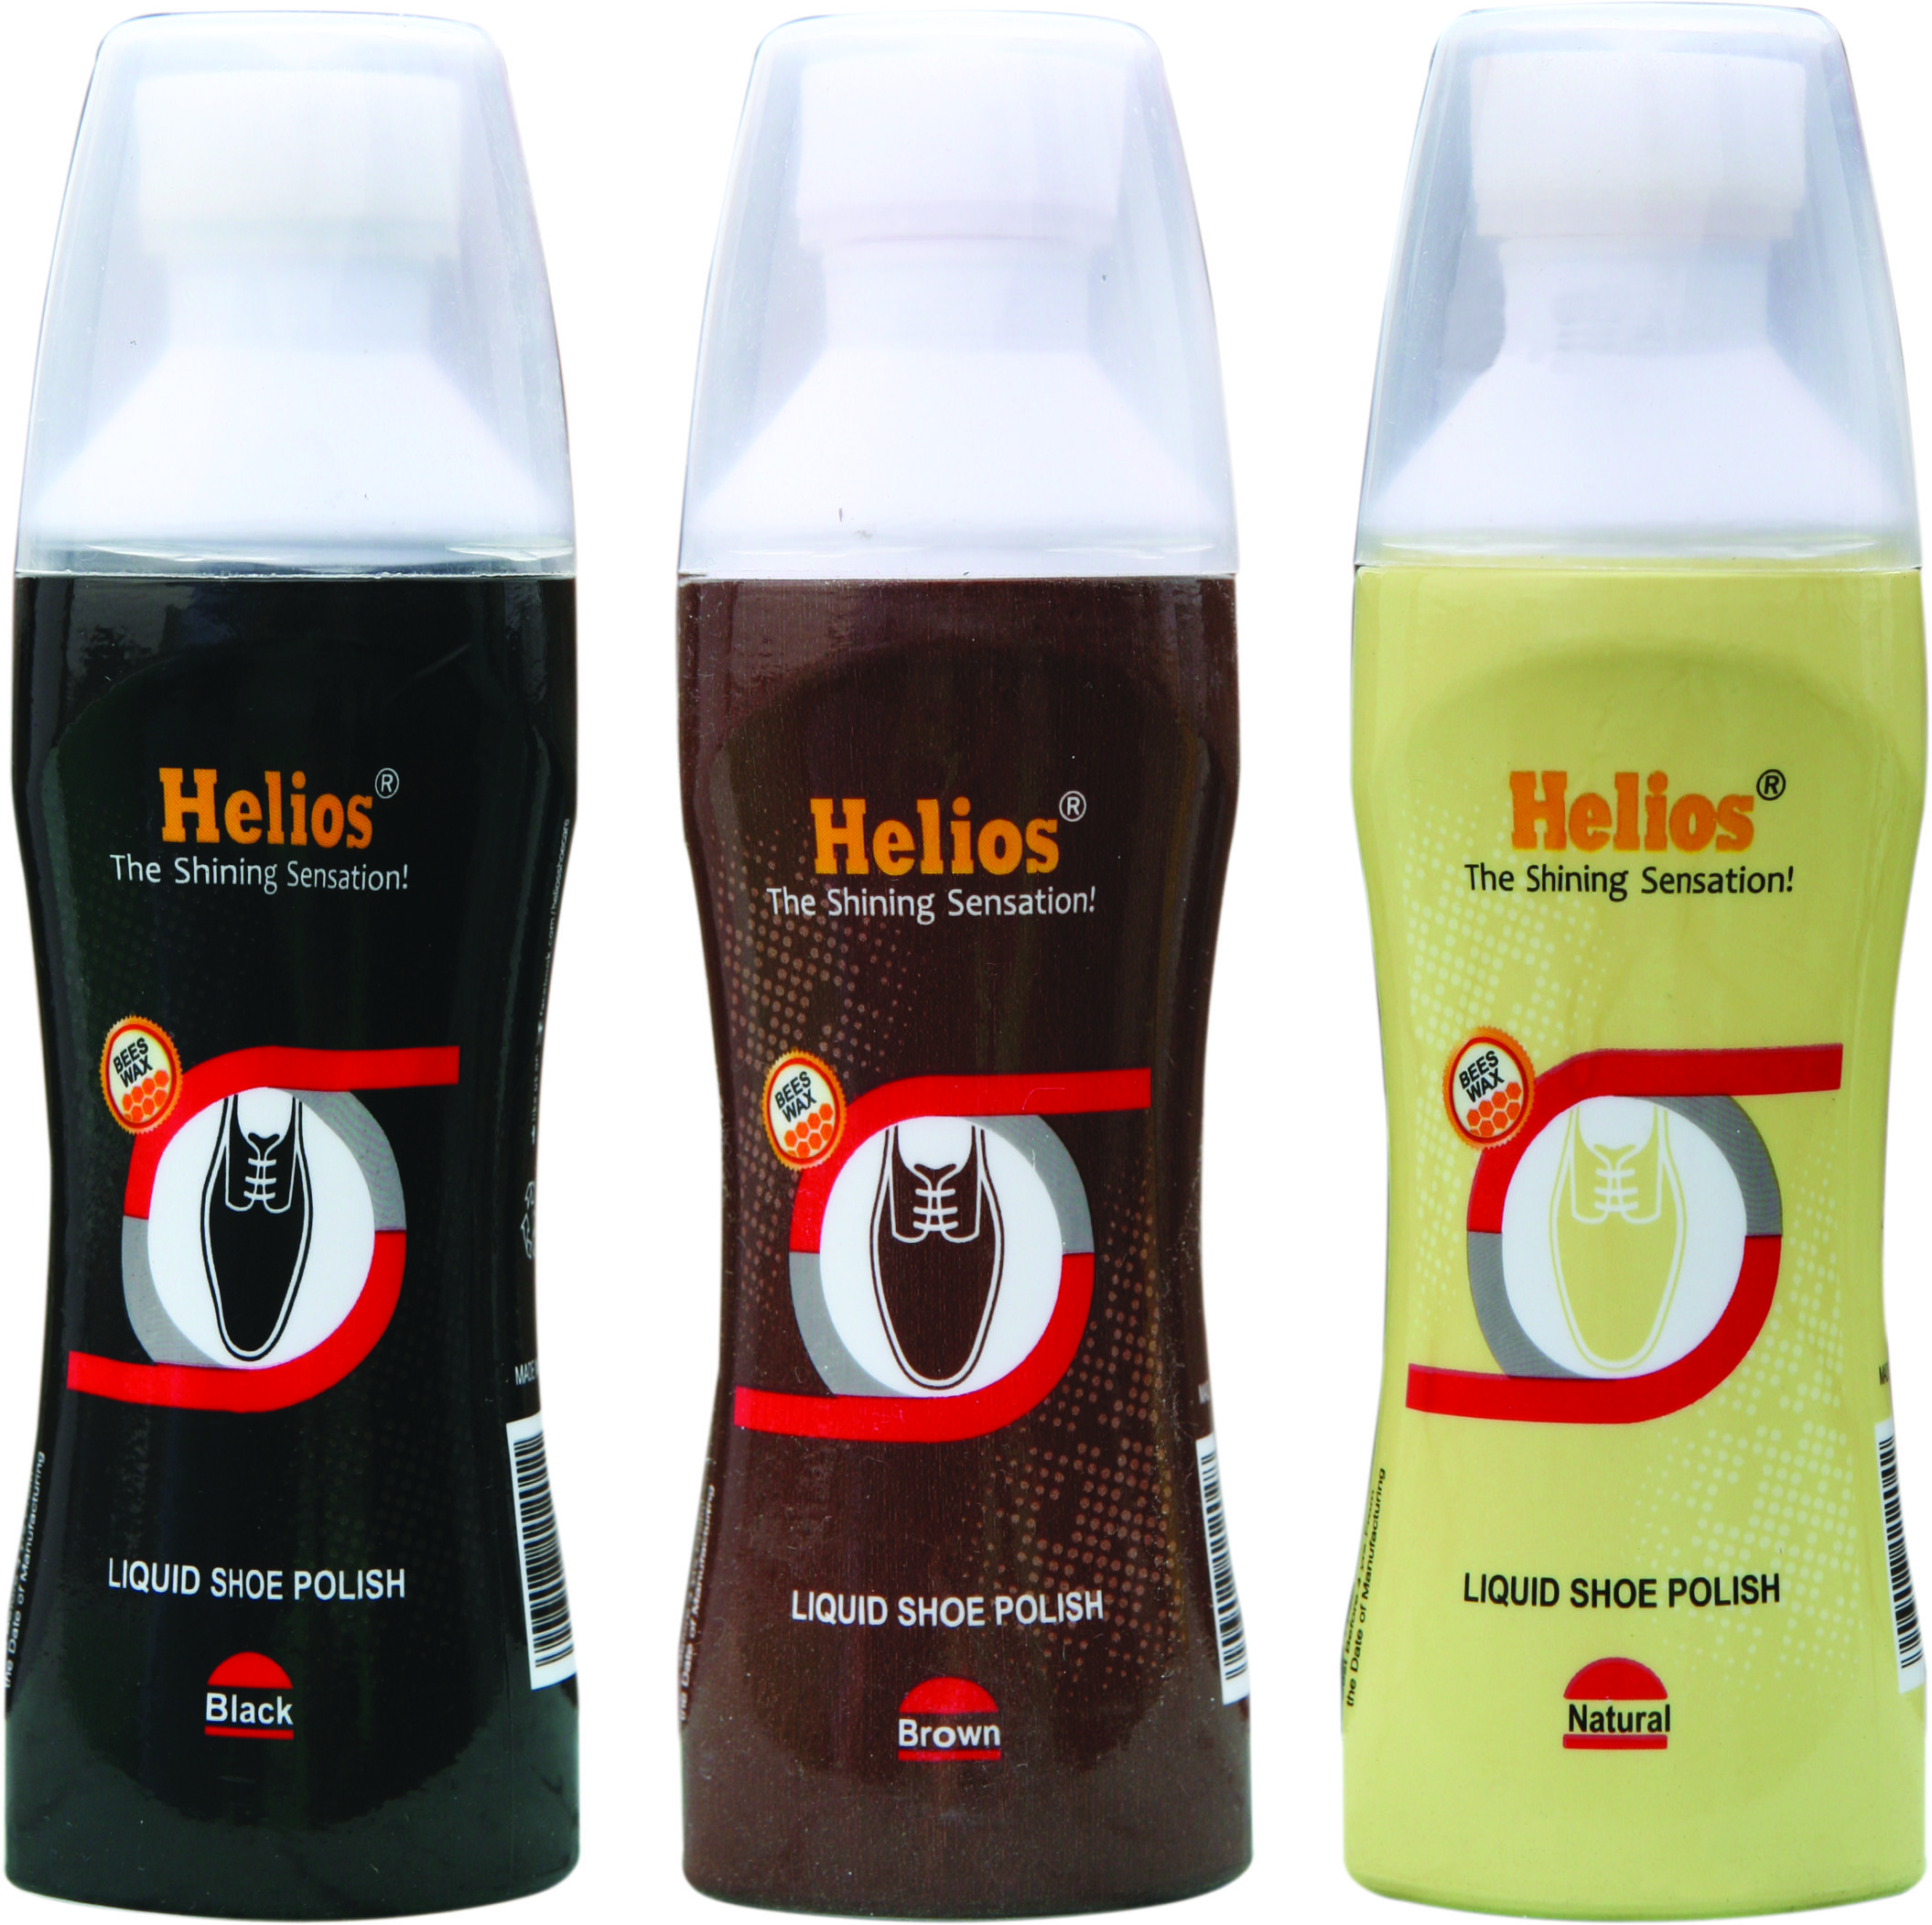 Helios Shoe Care Product Review! – aka 